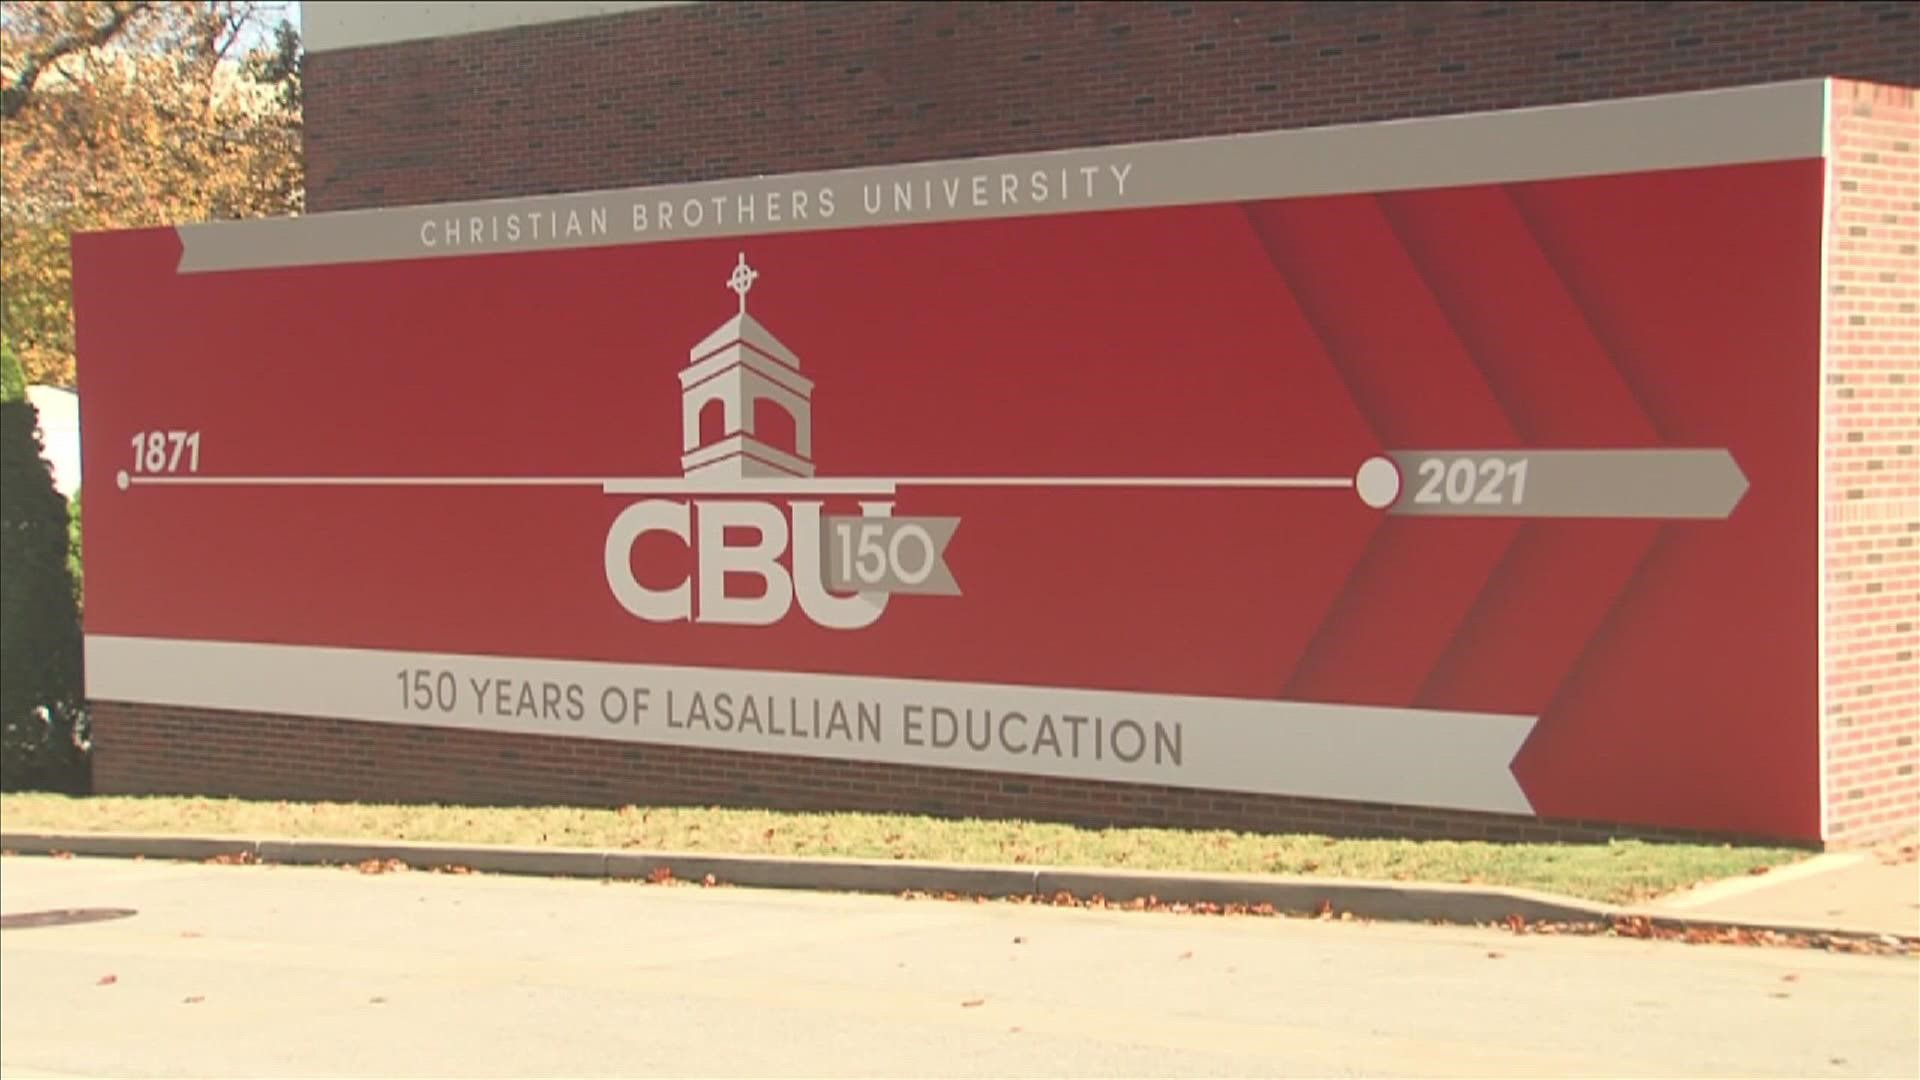 In a notice on the school’s website, CBU said it will become a “mask friendly campus,” meaning masks will not be required in indoor public spaces or residence halls.